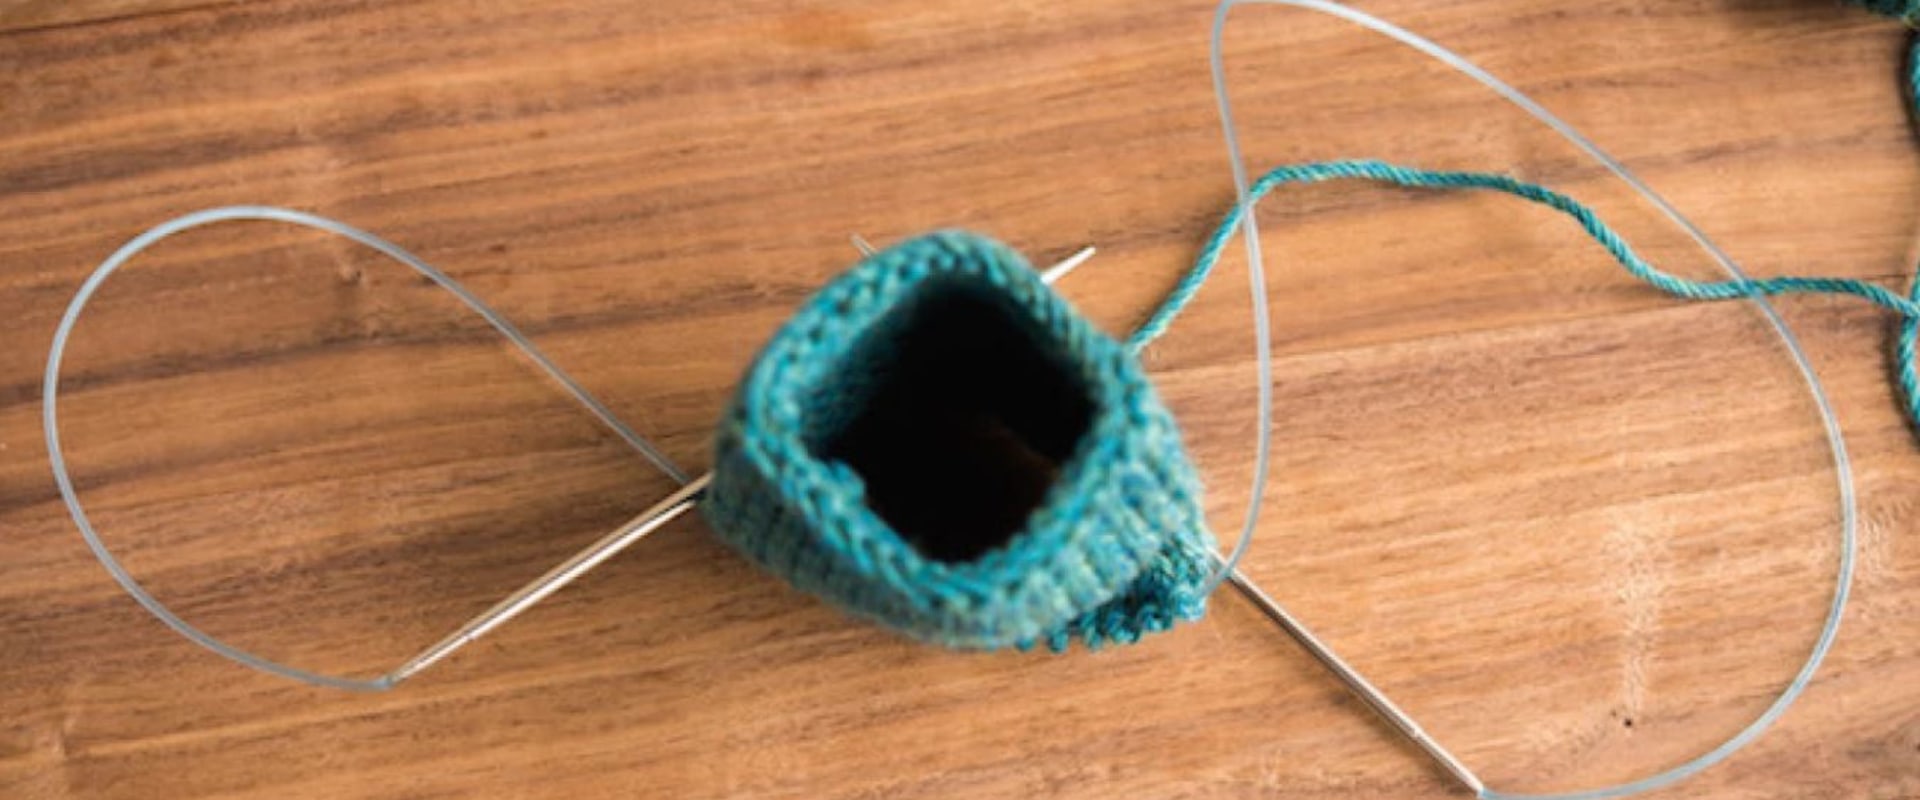 How Hard is Knitting to Learn? An Expert's Perspective